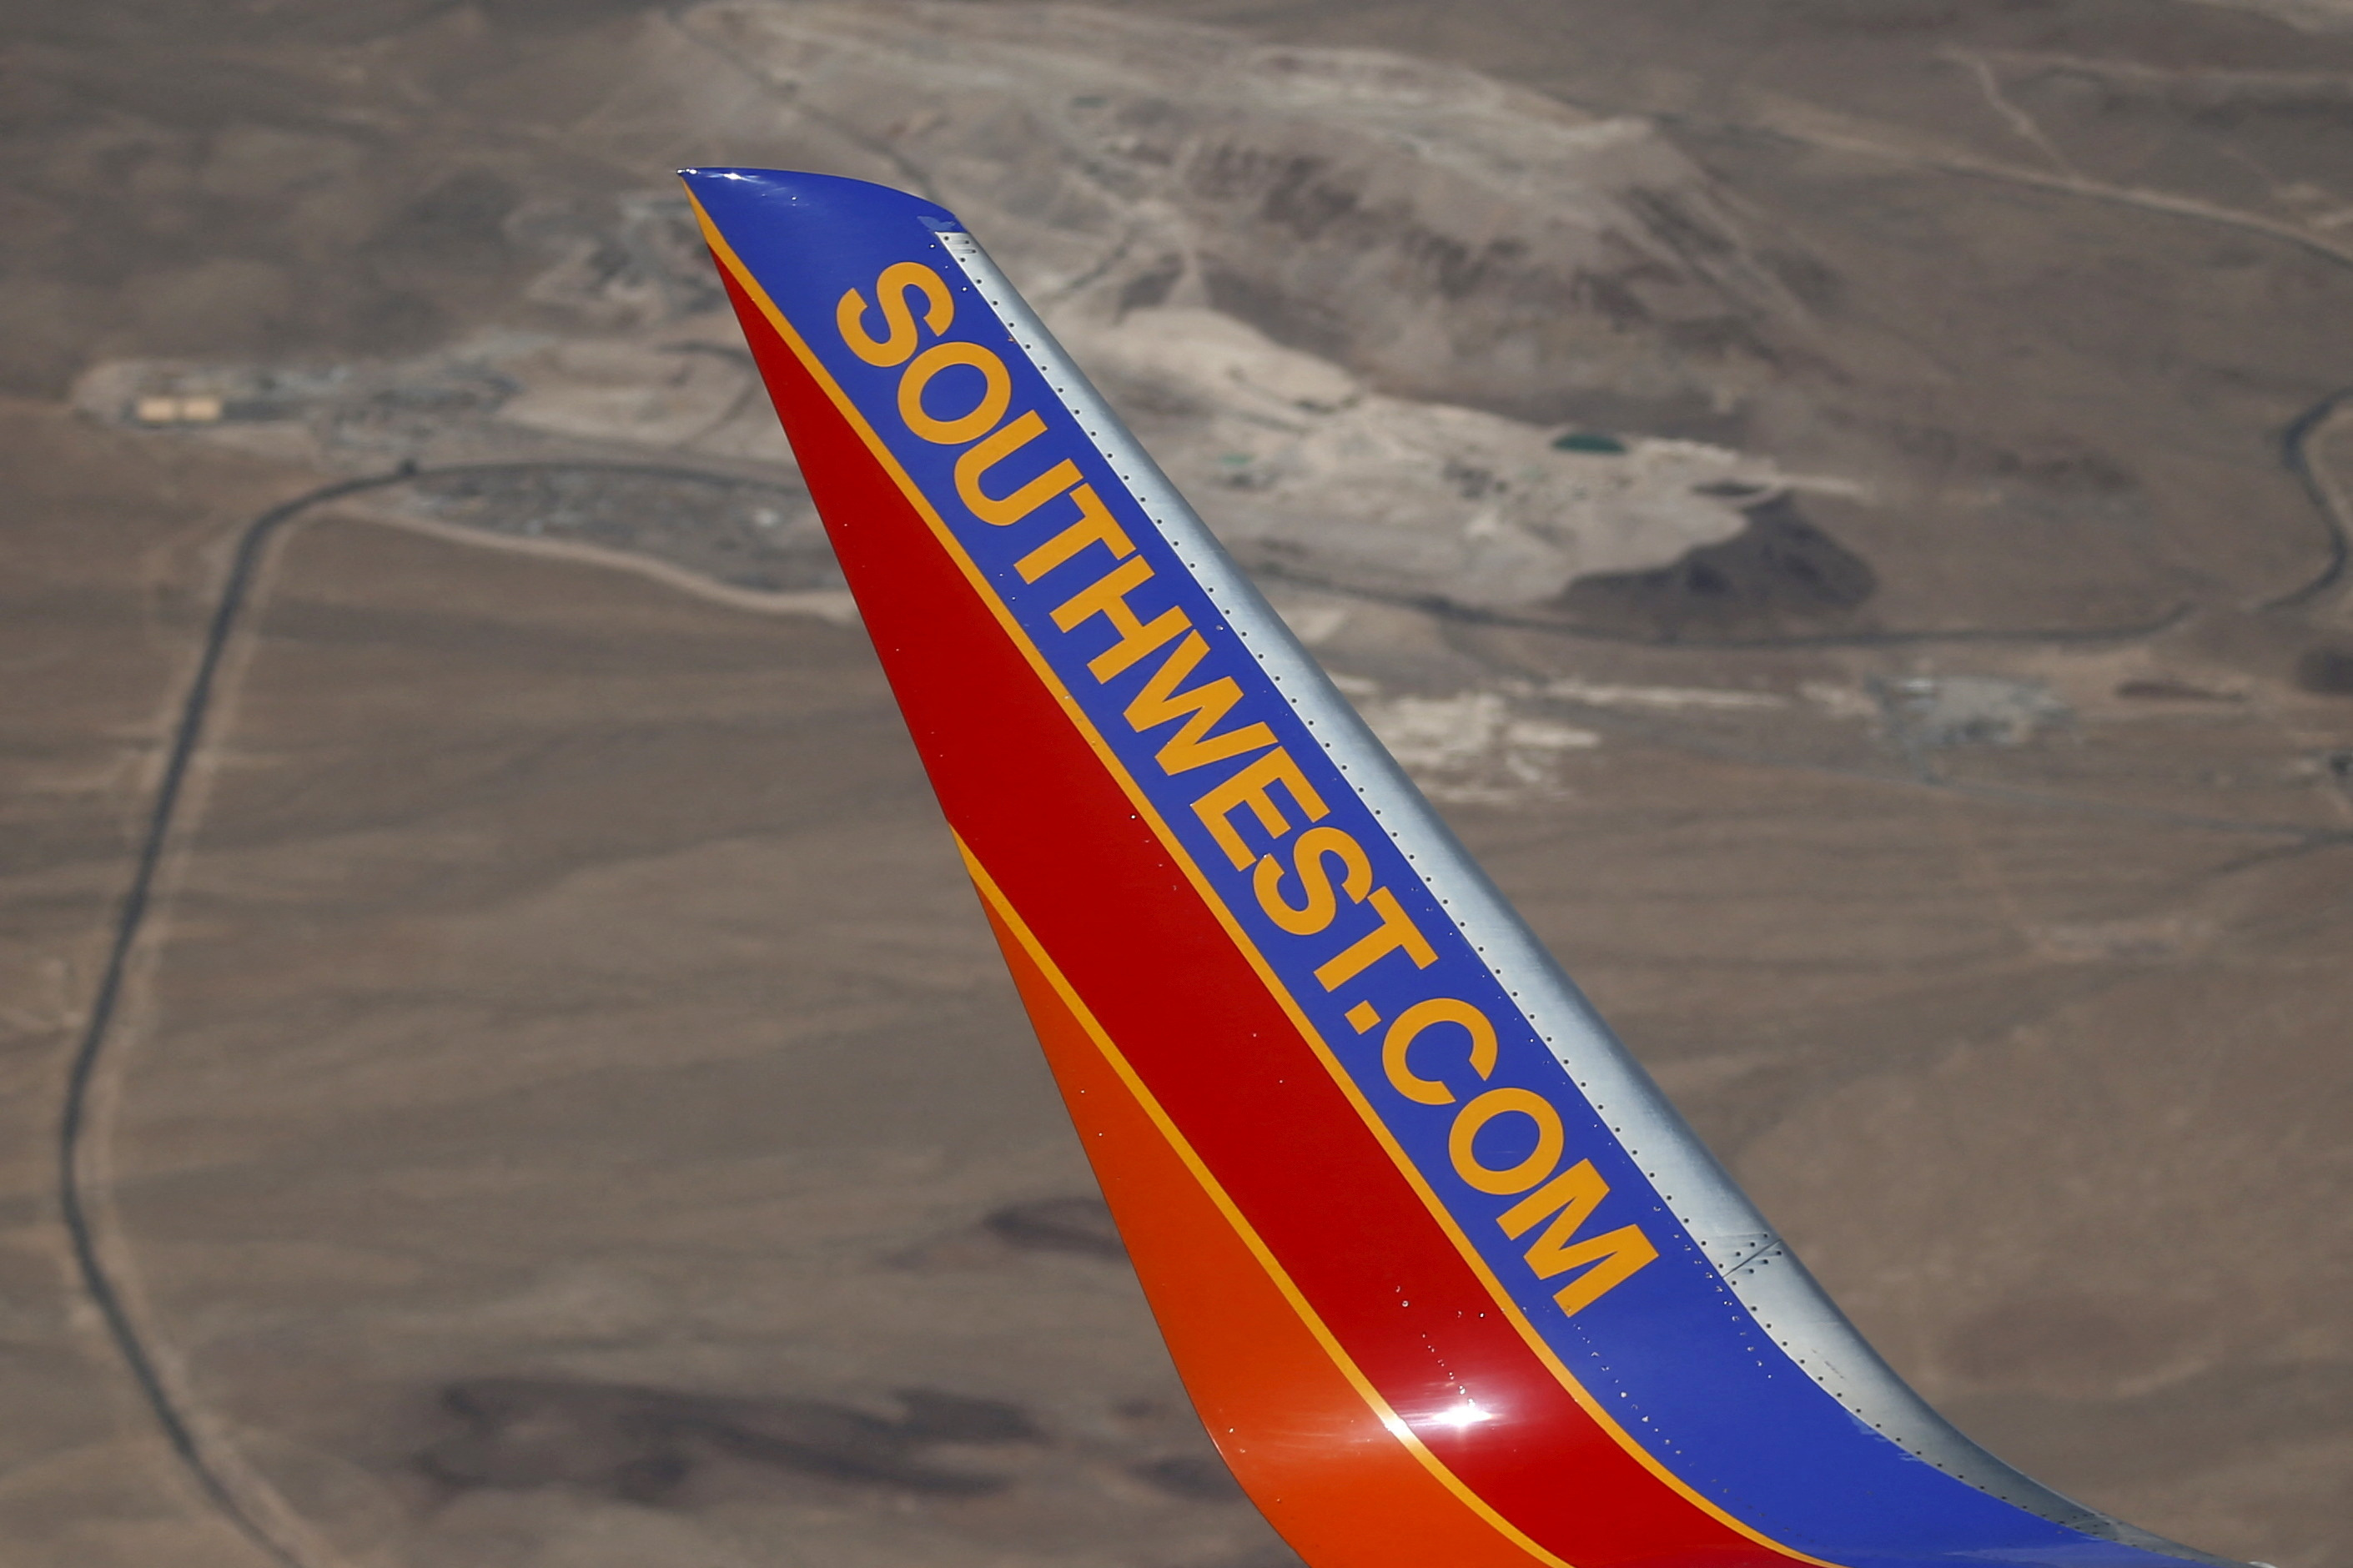 NTSB says Southwest engine cover loss caused by maintenance issue